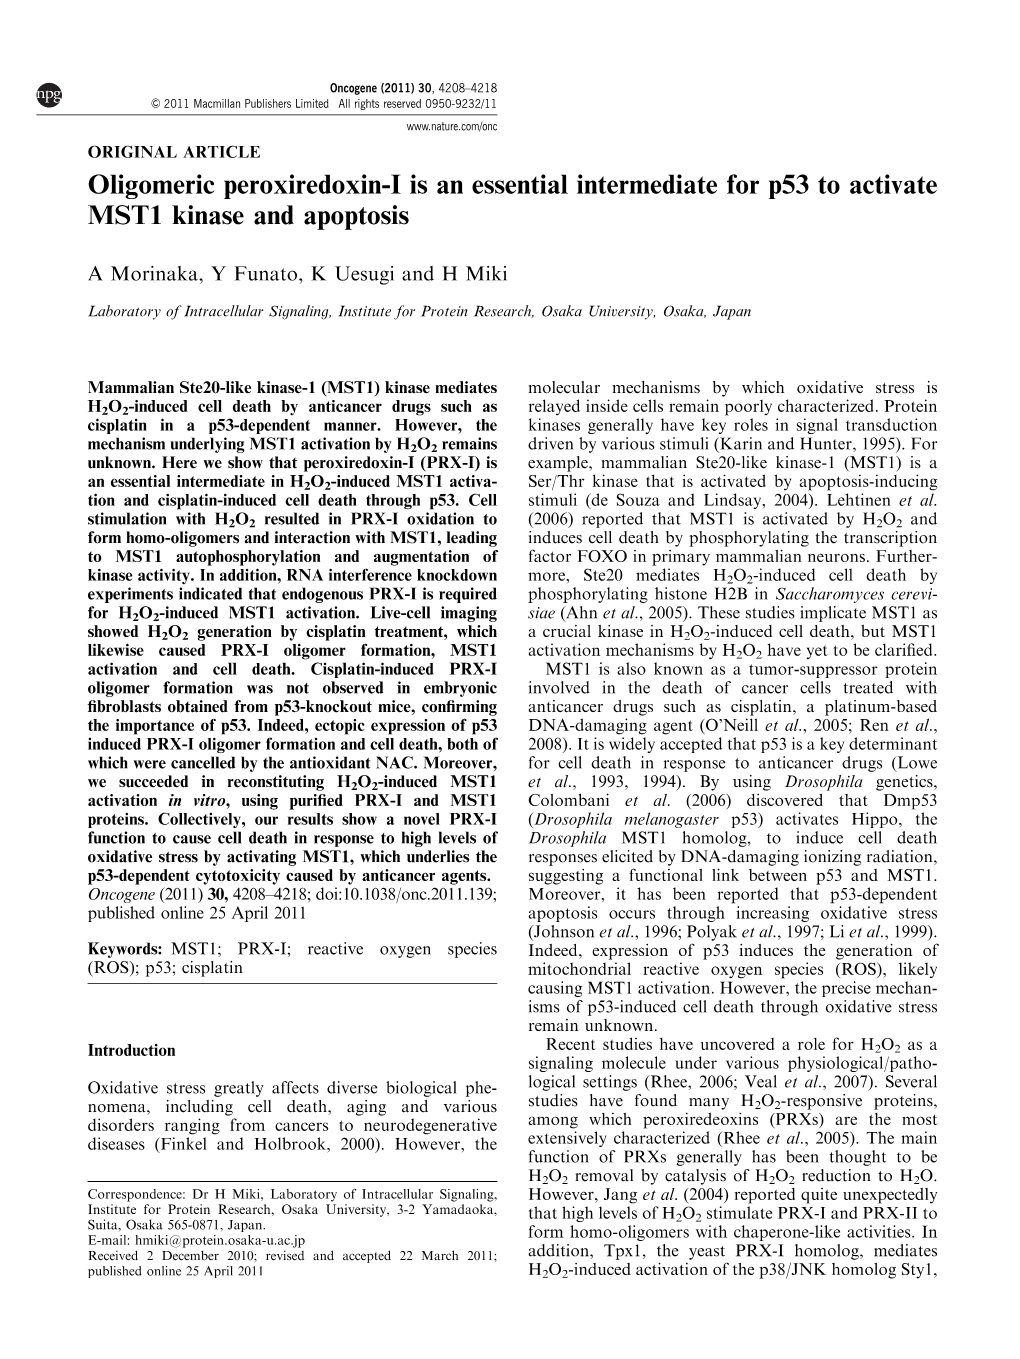 Oligomeric Peroxiredoxin-I Is an Essential Intermediate for P53 to Activate MST1 Kinase and Apoptosis